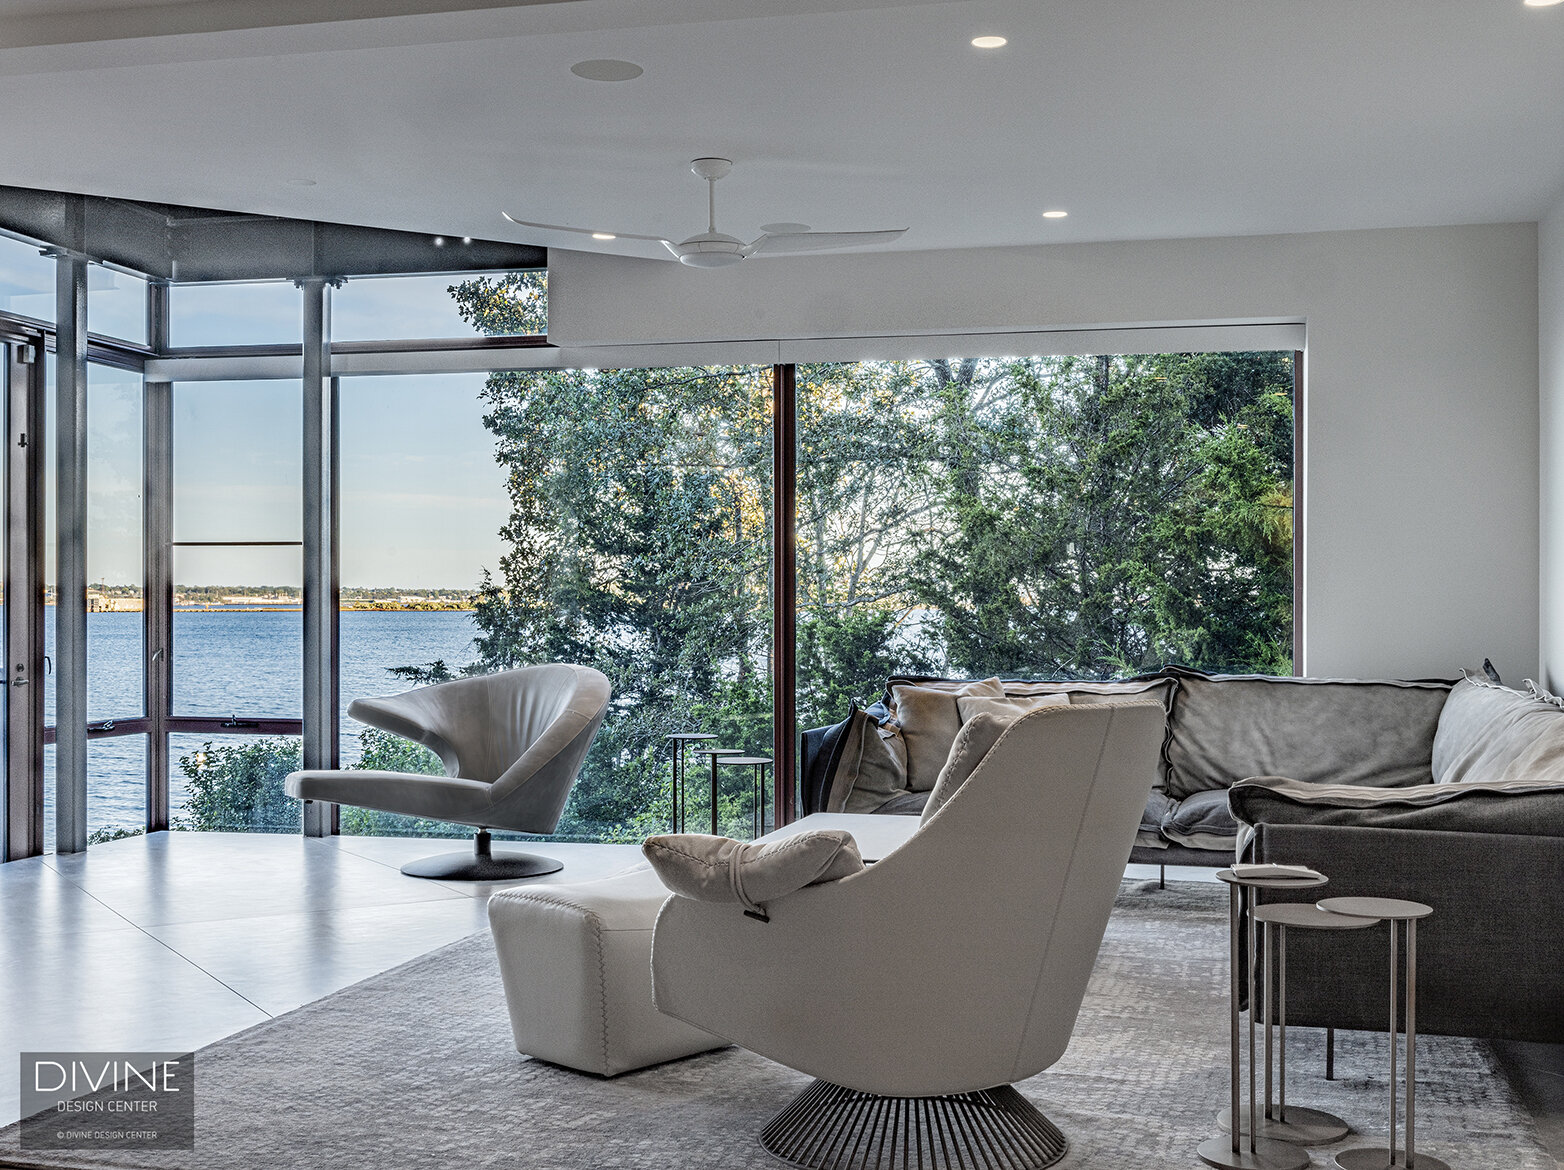  A modern living room with sweeping ocean views displayed through large, glass windows. Arketipo Firenze sectional sofa and occasional chair pair with the iconic parabolica armchair by leolux. clustered, nesting side tables by Arketipo are highlighte